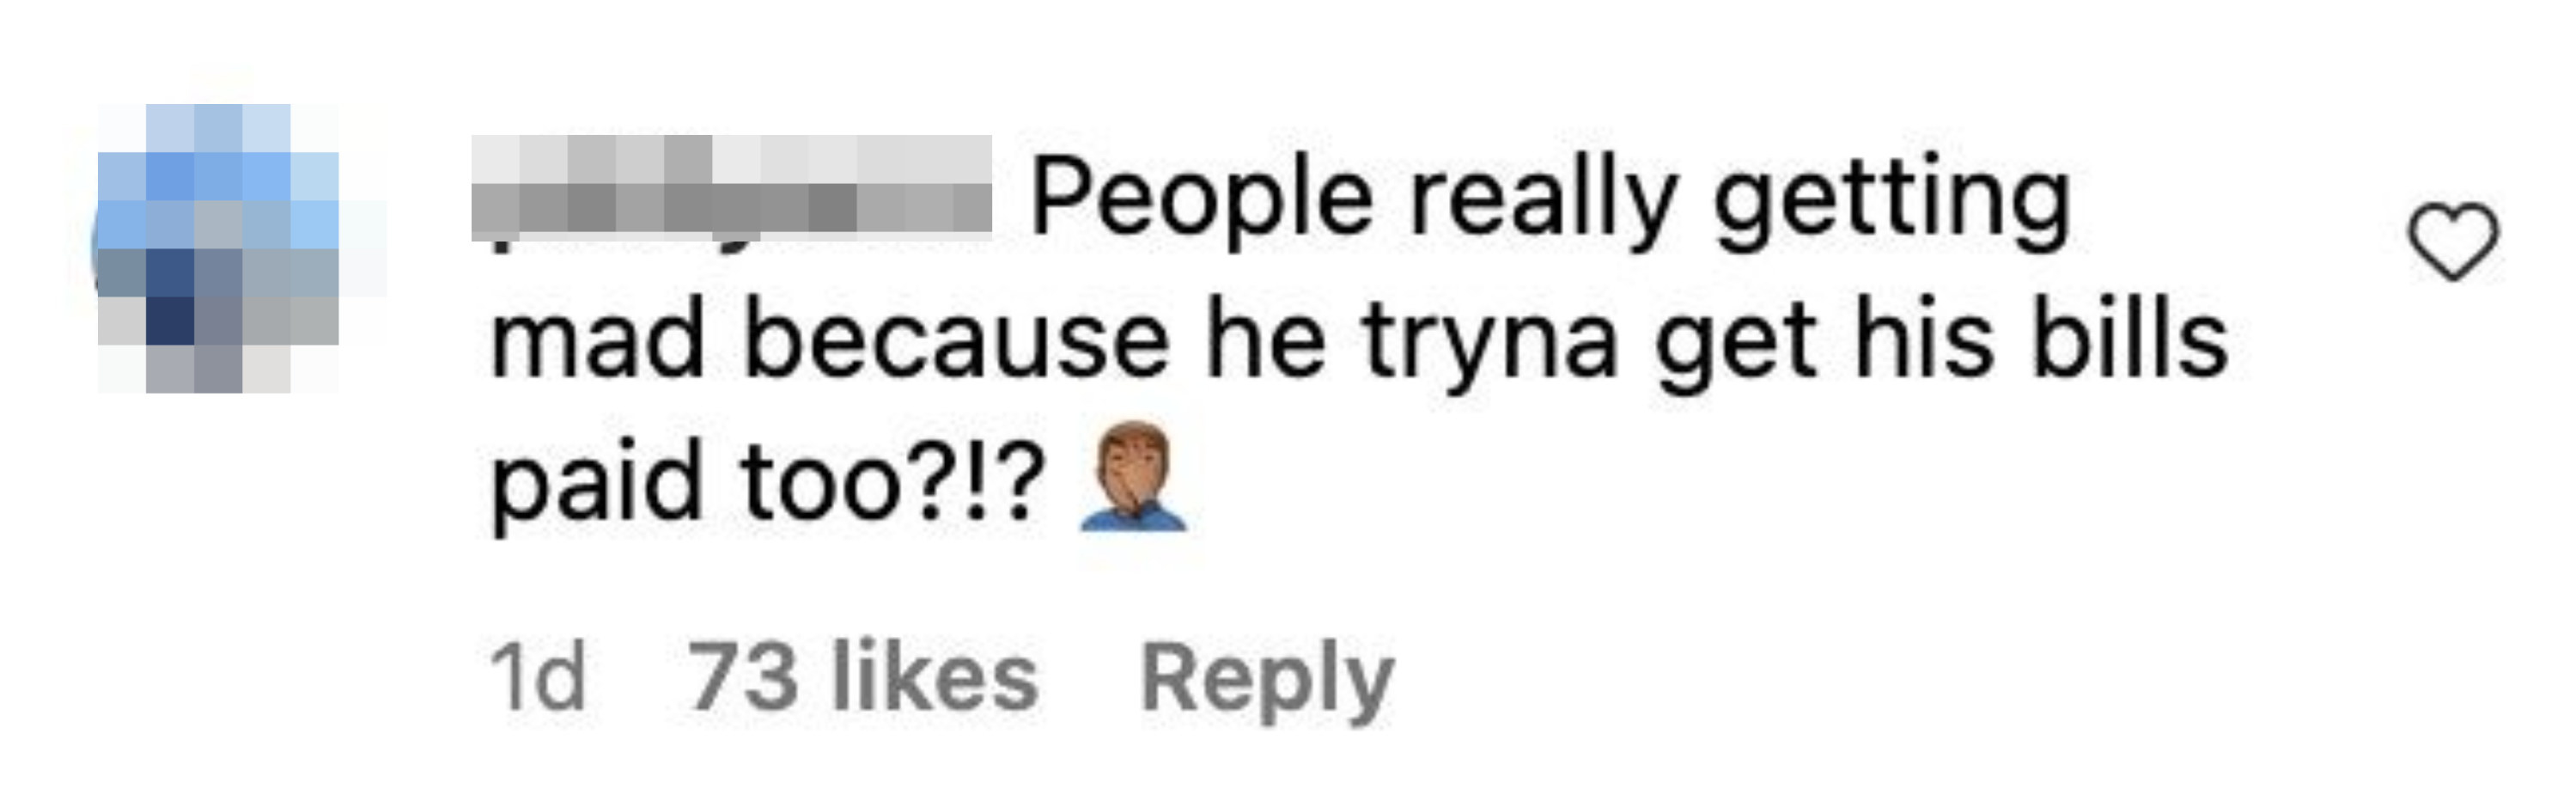 A comment that says &quot;People really getting mad because he tryna get his bills paid too?!?&quot;